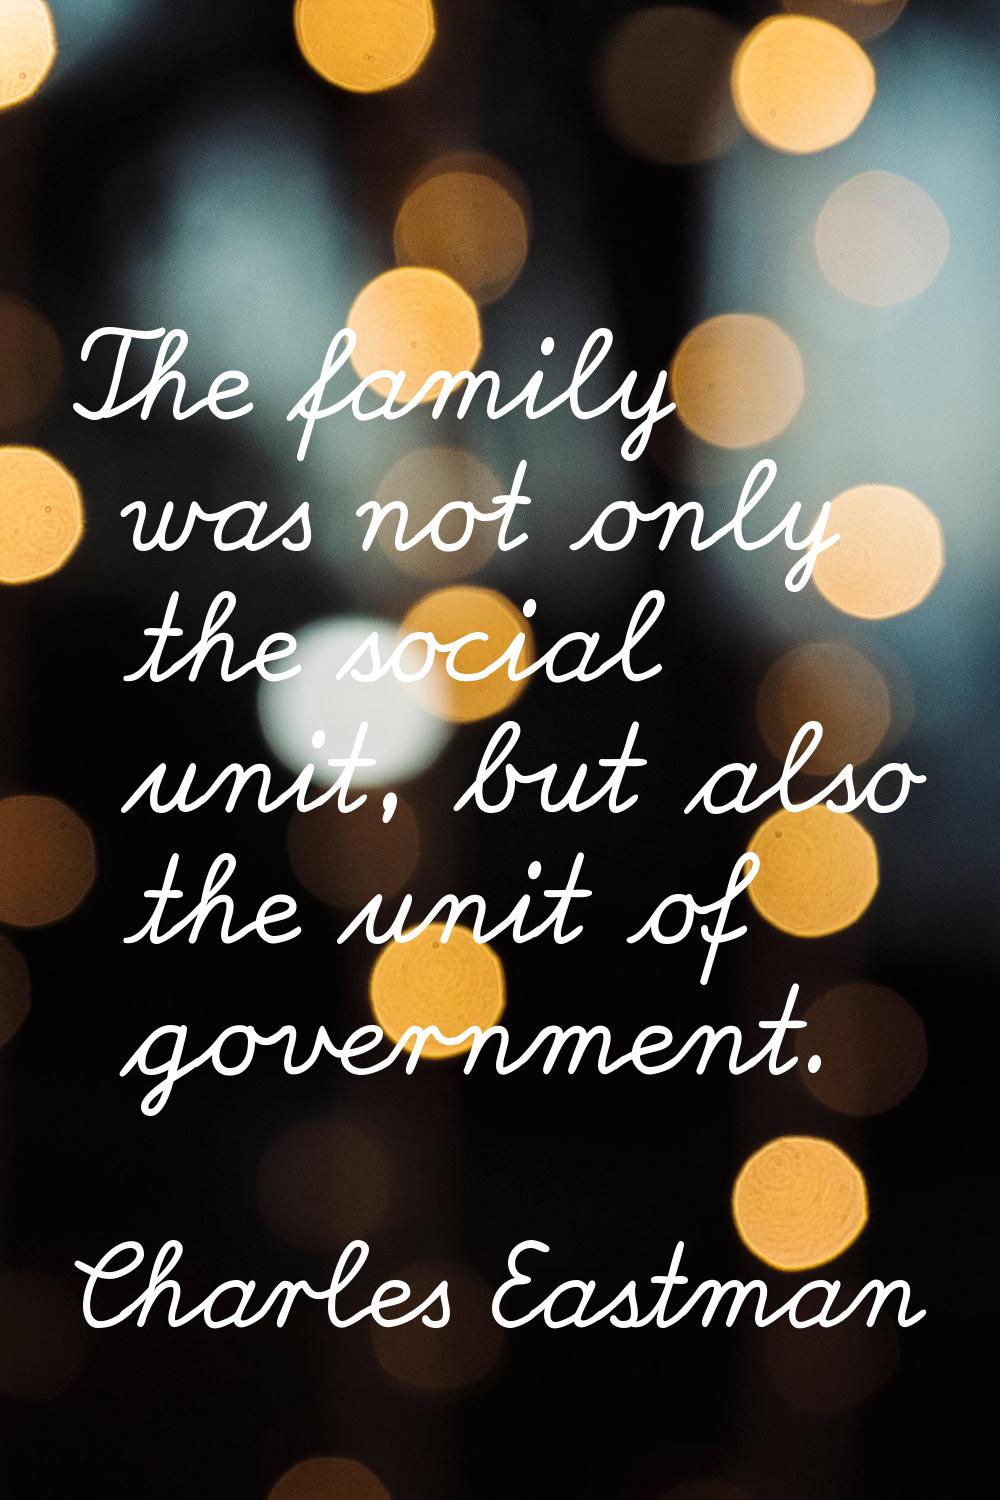 The family was not only the social unit, but also the unit of government.